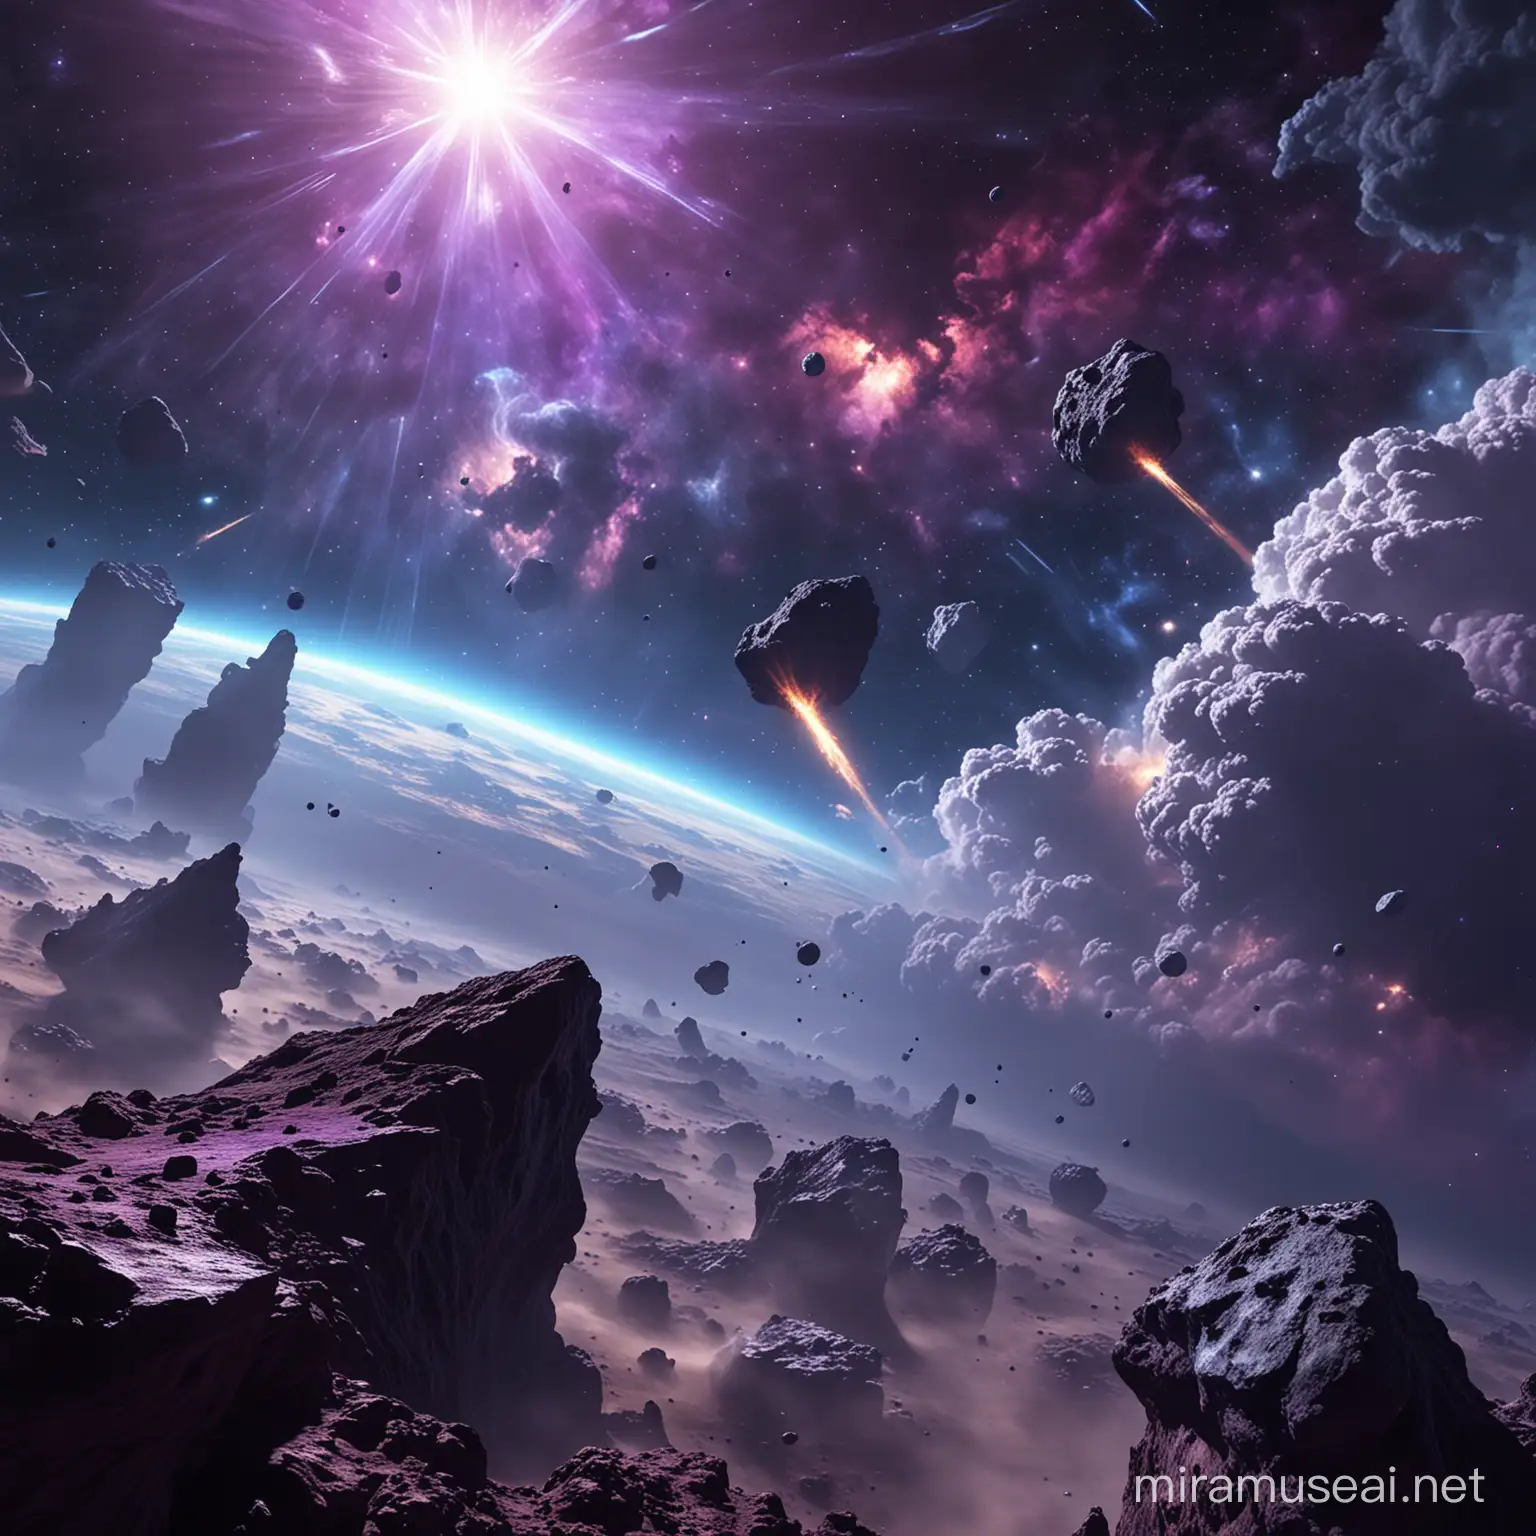 space scene with blues and purples.  Asteroids and clouds.